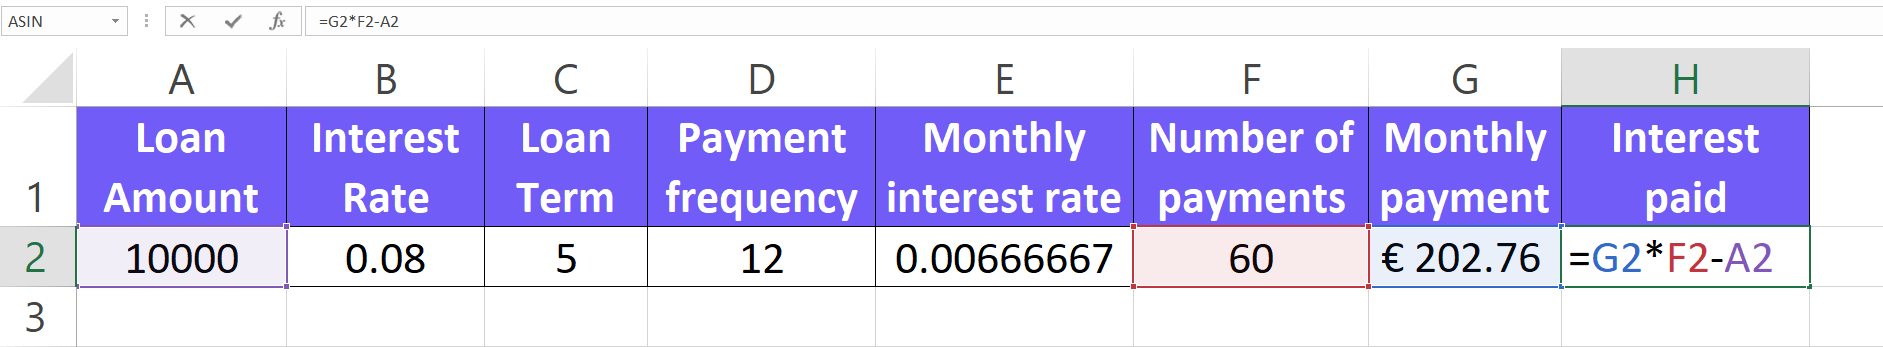 Calculate the total interest amount paid for business loan screenshot from excel with formula